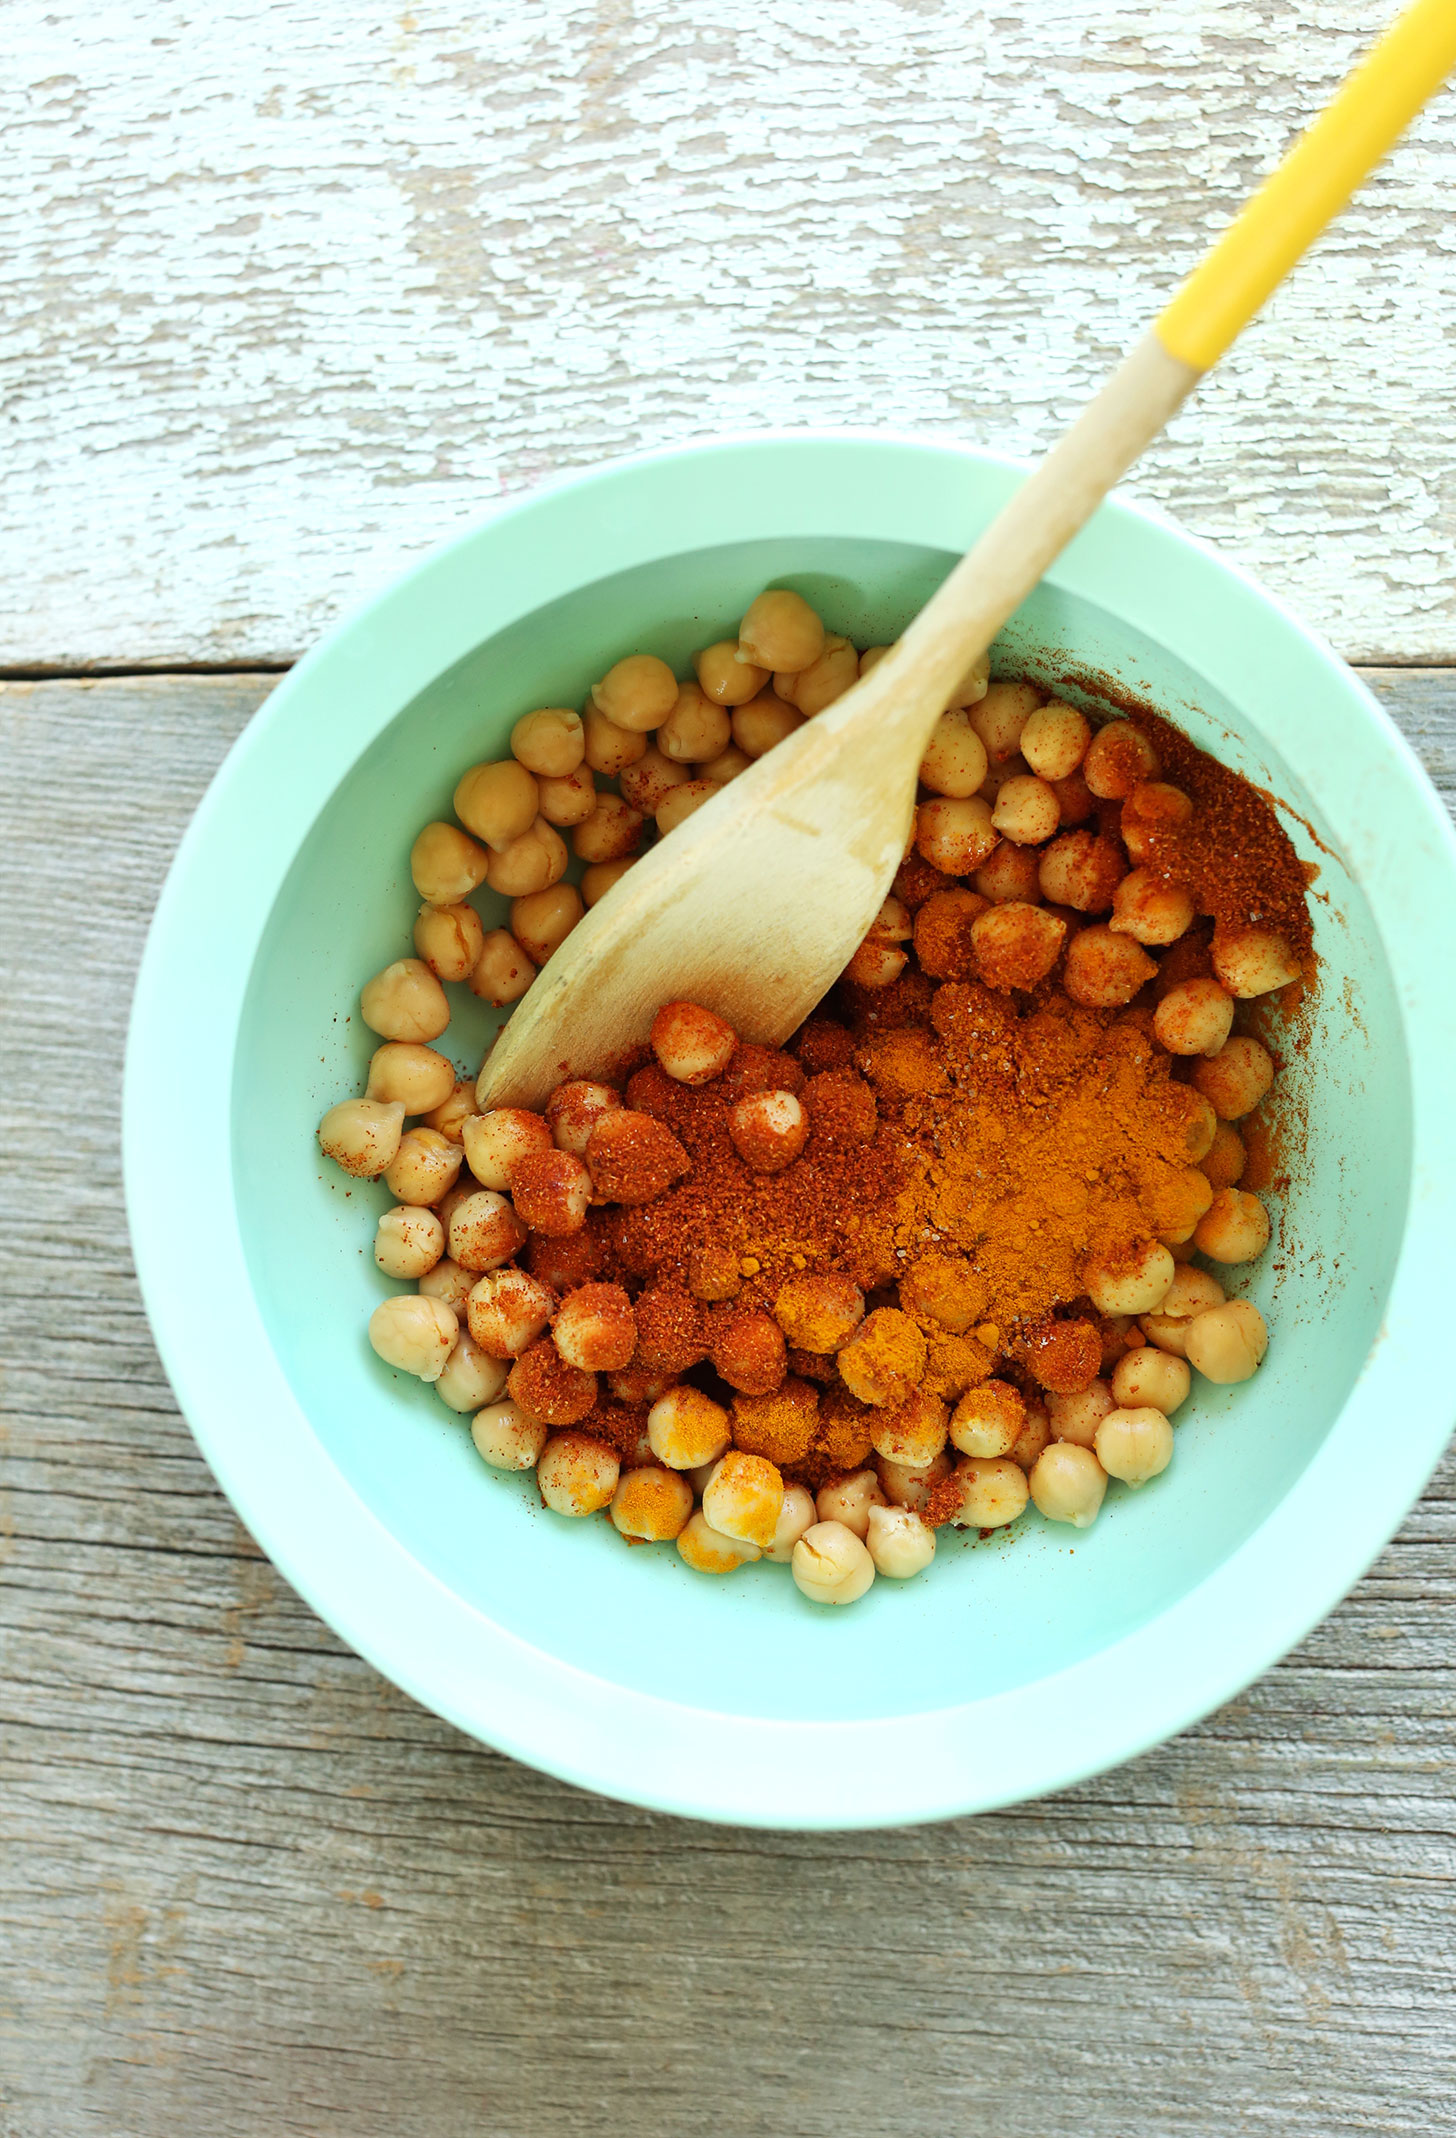 Bowl of masala spices and chickpeas